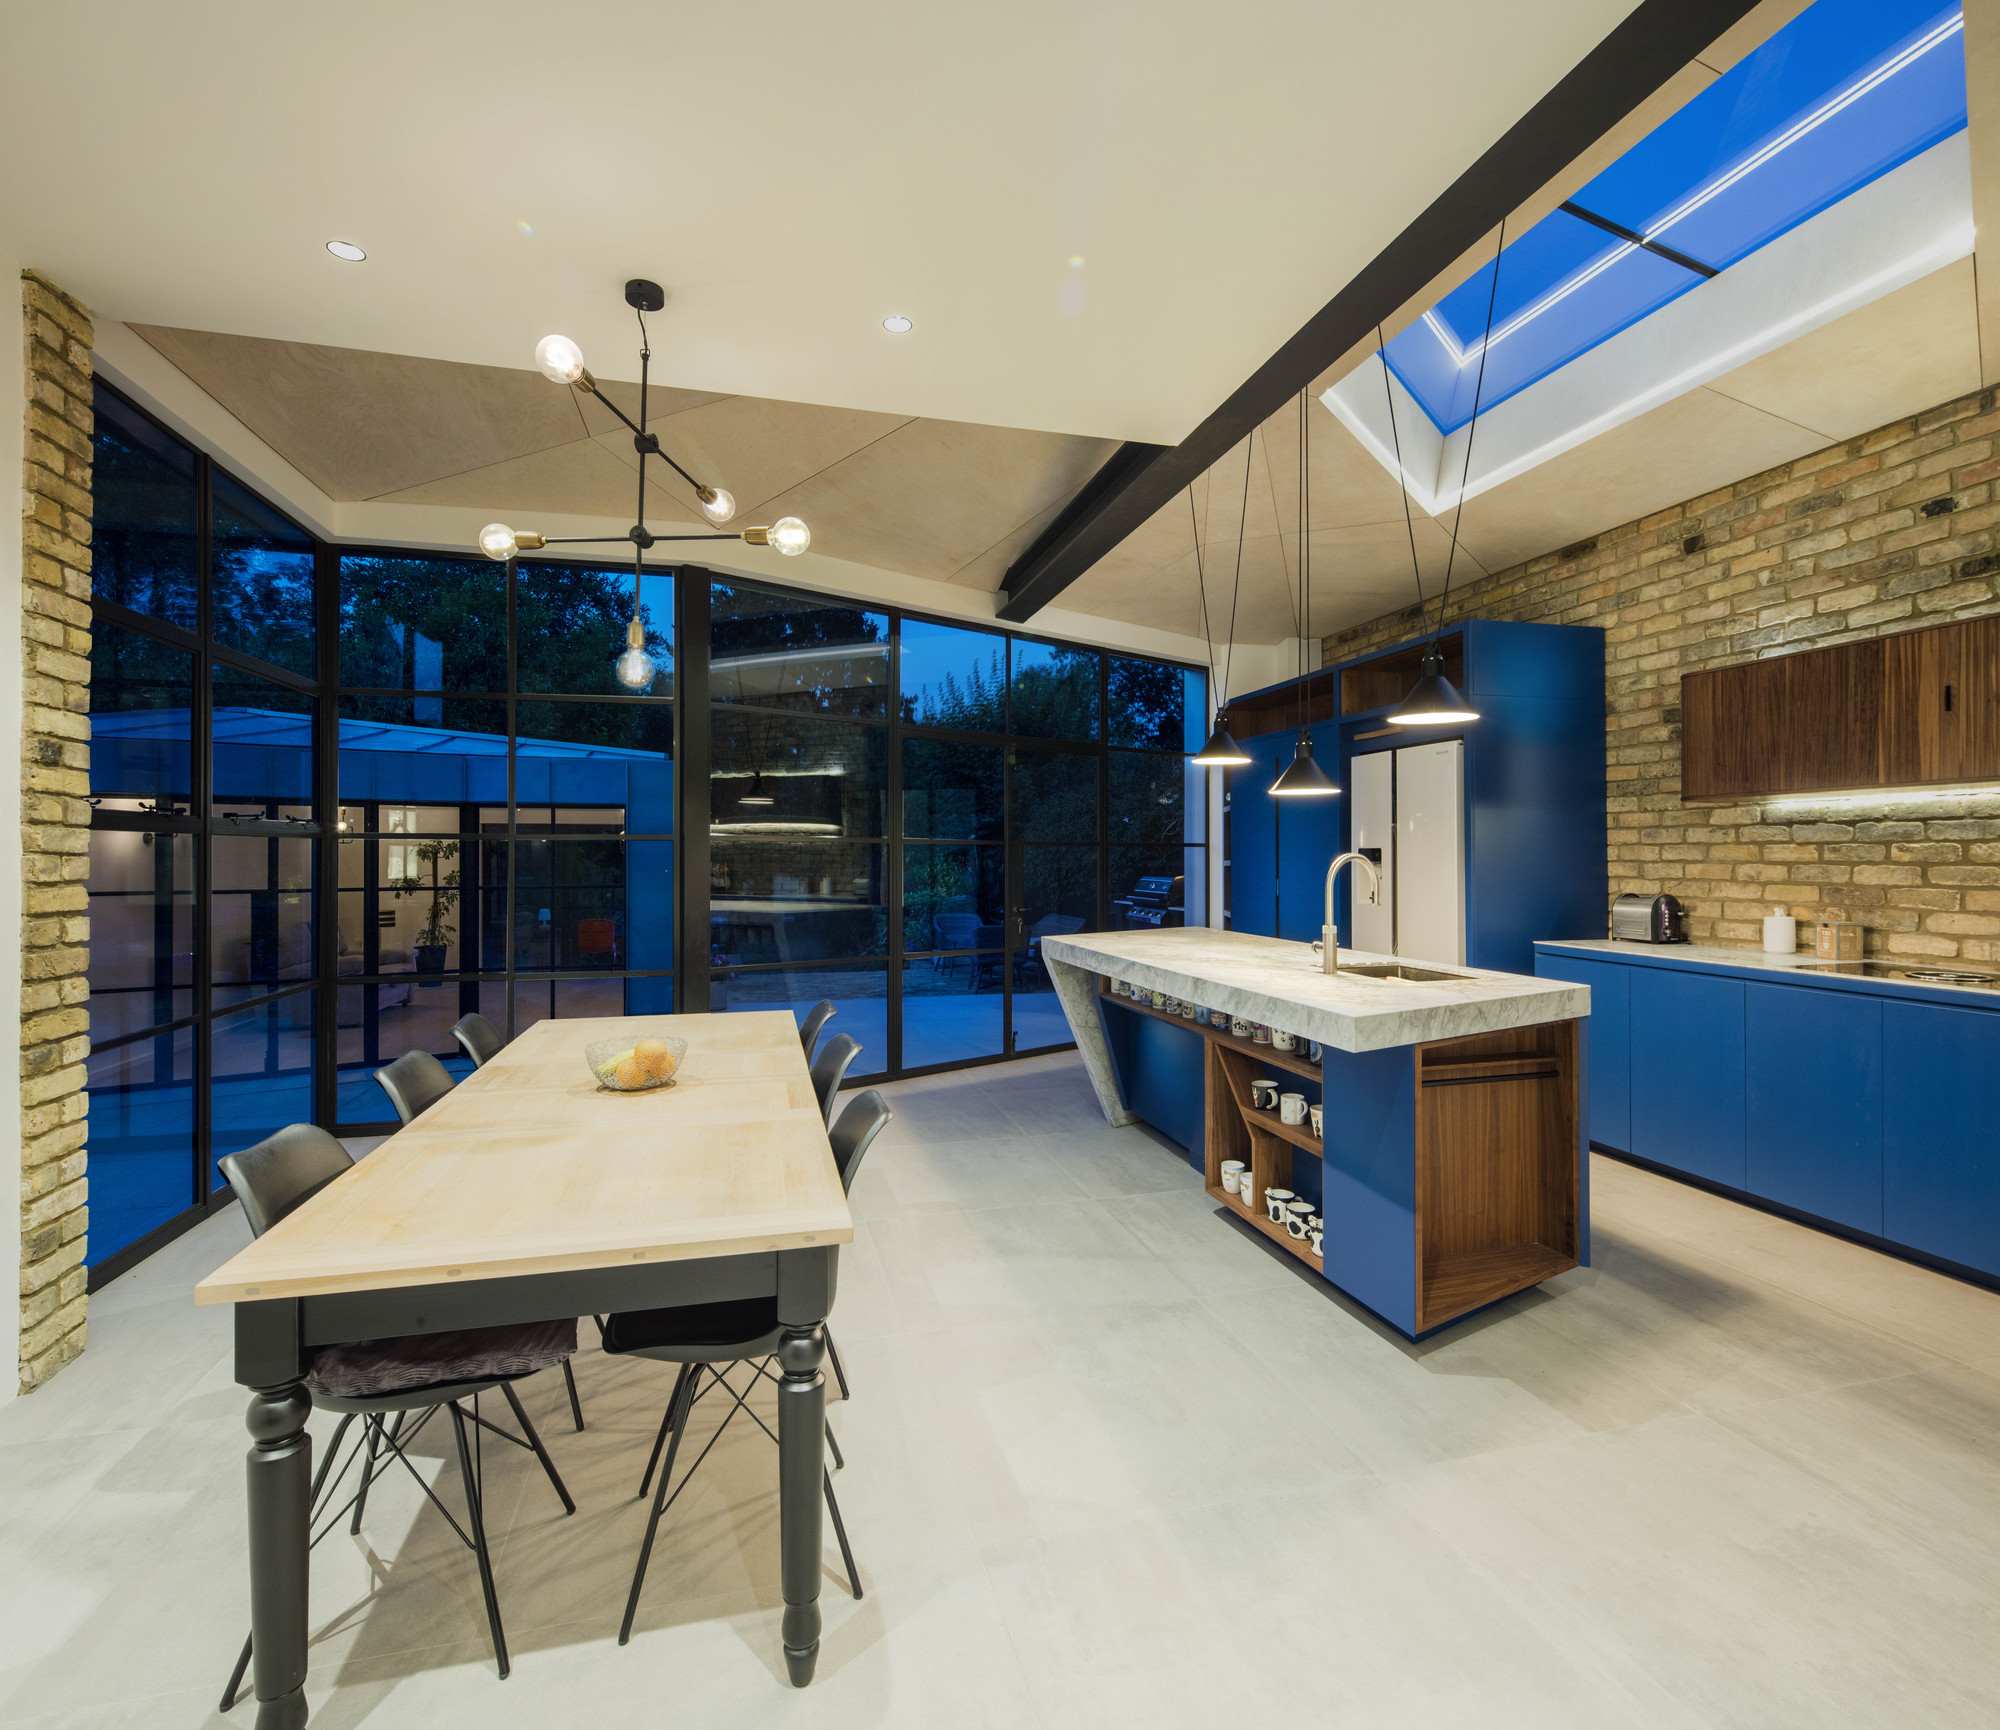 Blue makes the biggest impression inside the new kitchen and dining area